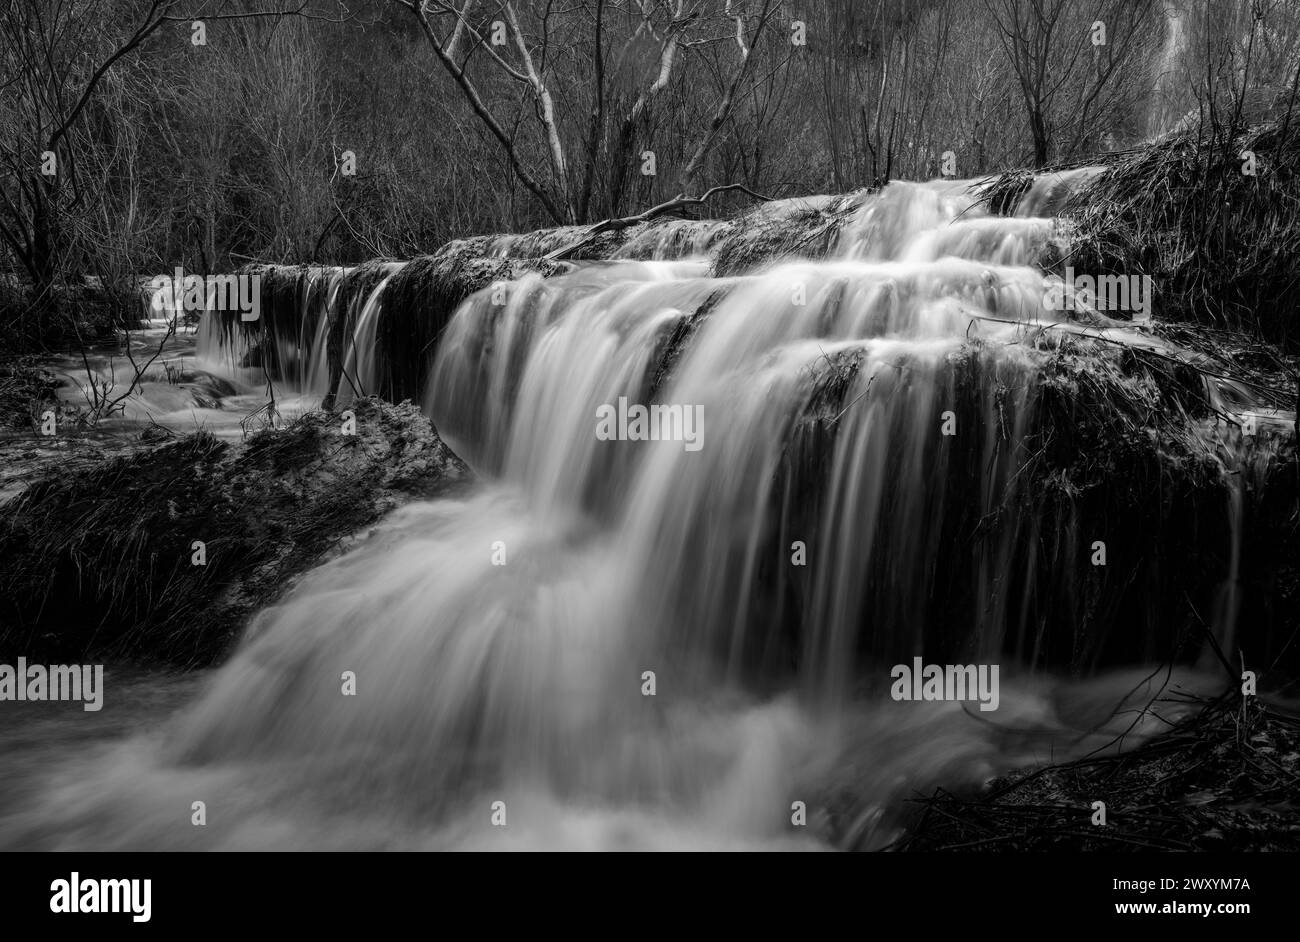 The powerful movement of water over Rio Mundo's natural rapids is captured in stunning detail in this monochromatic image Stock Photo